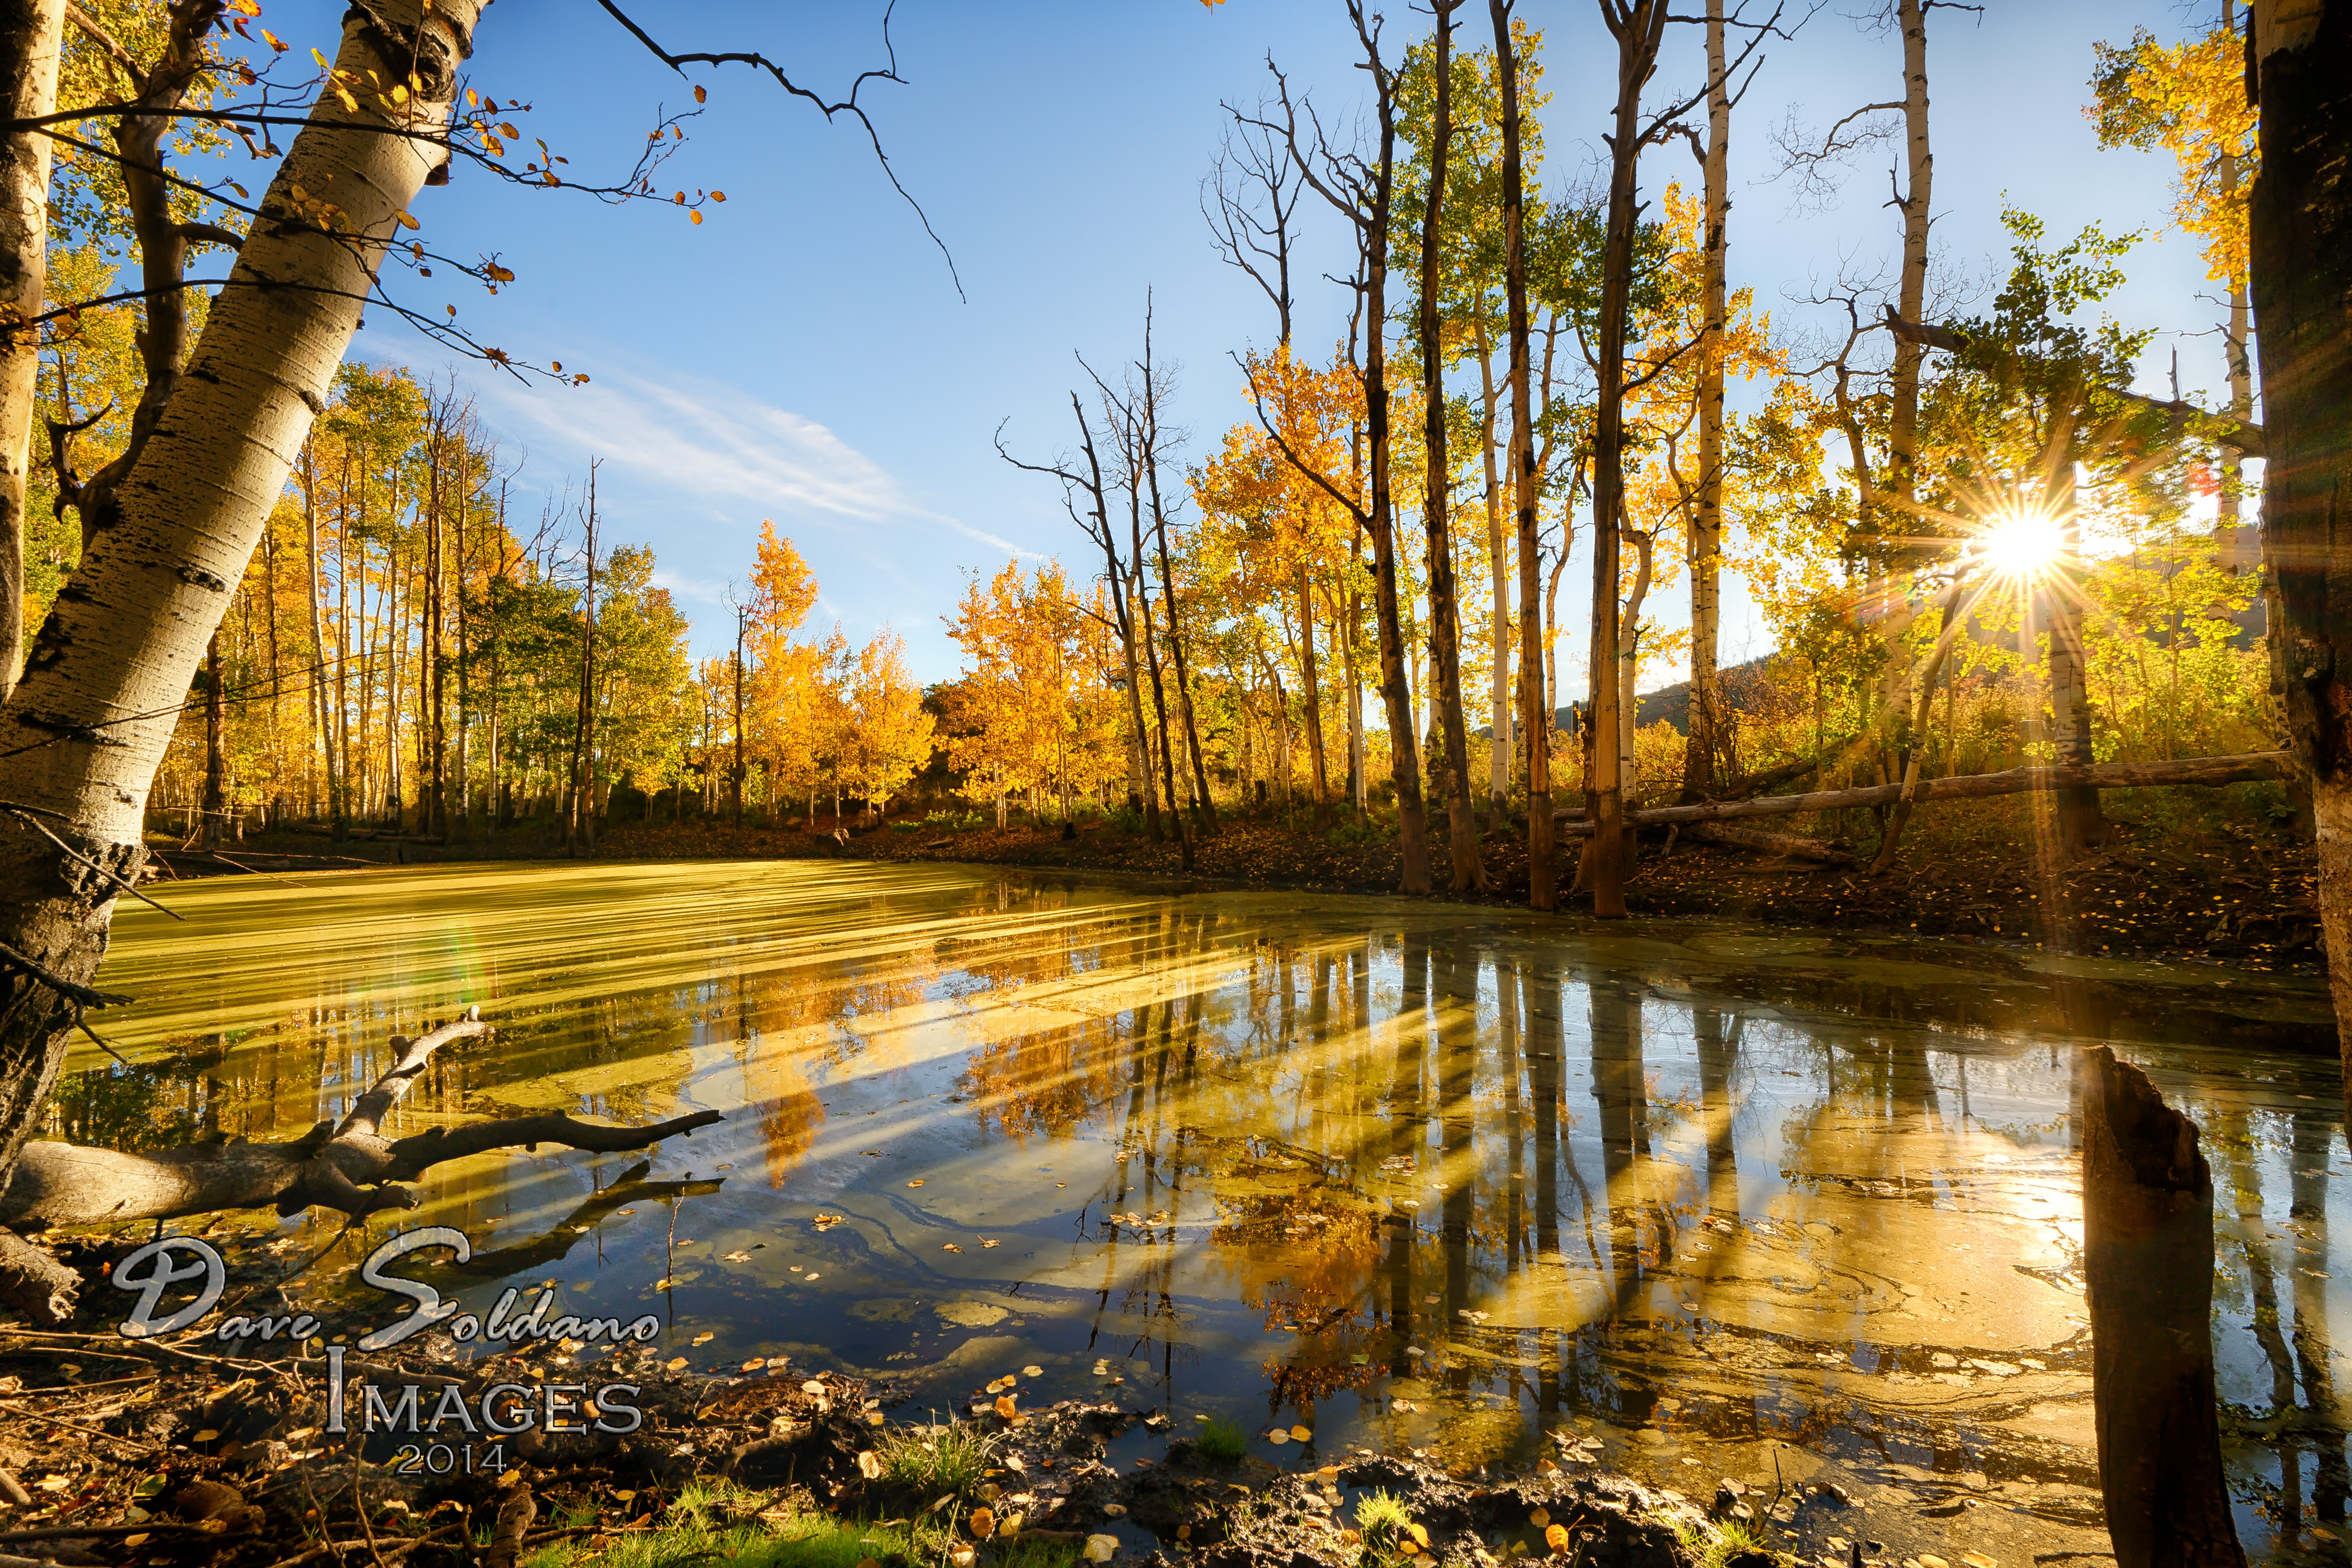 Wallpaper, sunlight, landscape, fall, leaves, lake, water, nature, red, reflection, grass, sky, branch, evening, morning, river, Sun, orange, pond, gold, Colorado, canal, peak, Bank, swamp, wetland, rays, tree, autumn, shadows, leaf